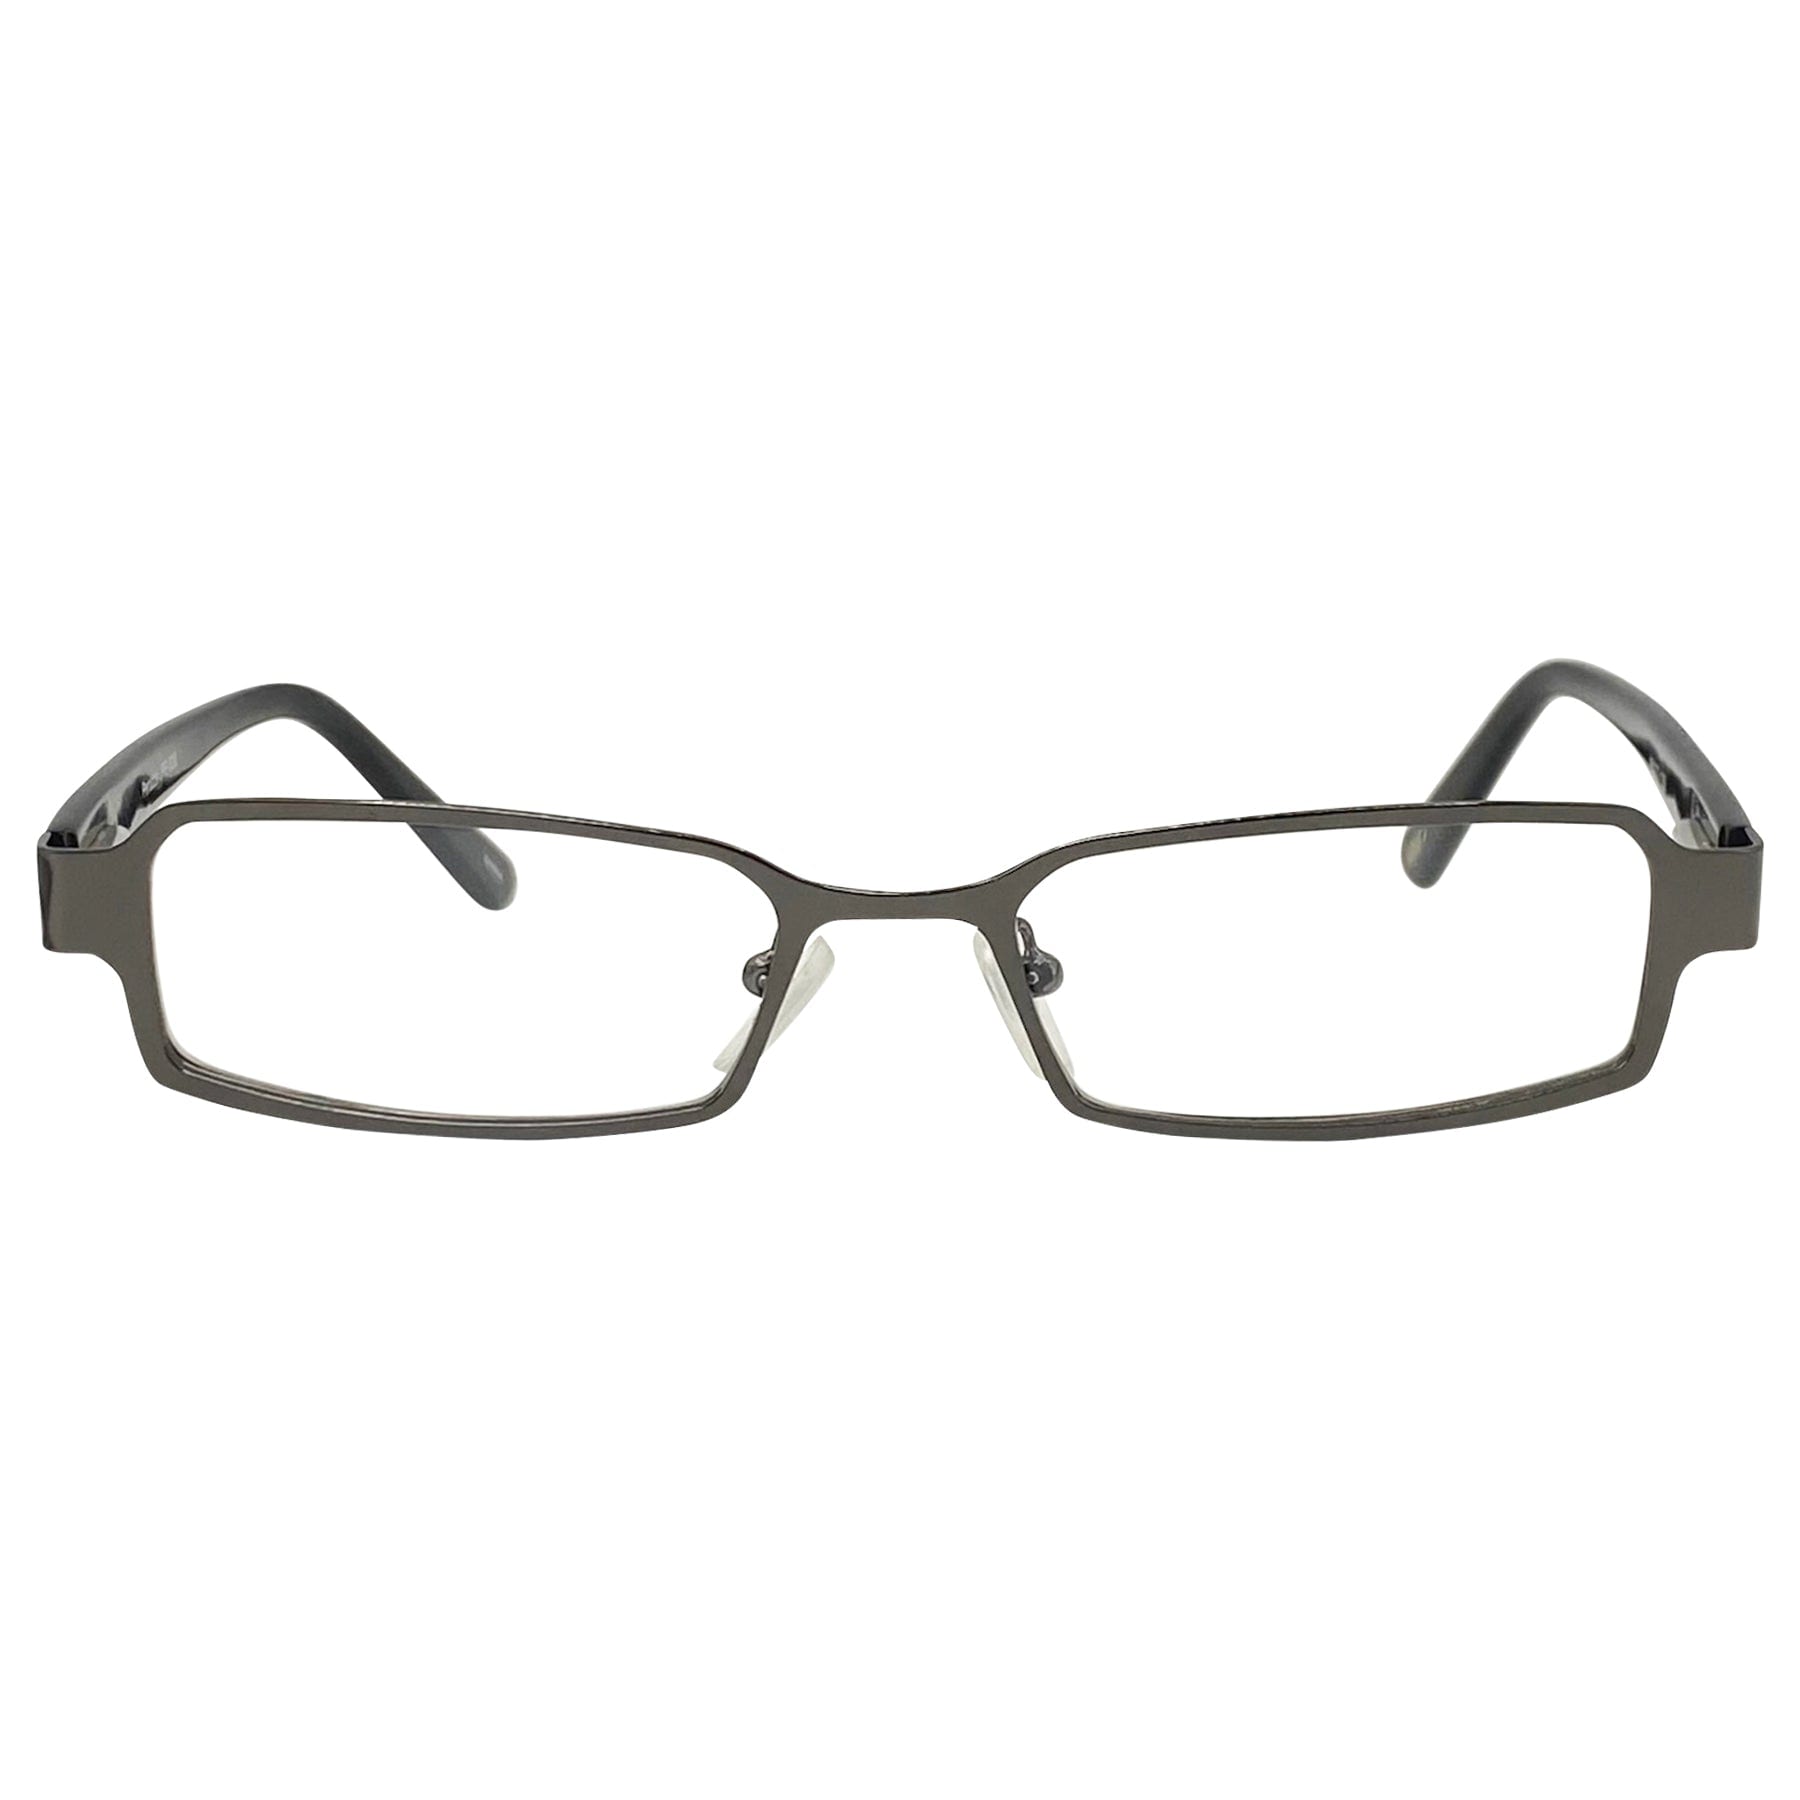 unisex clear lense glasses with a gunmetal metal 90s style frame